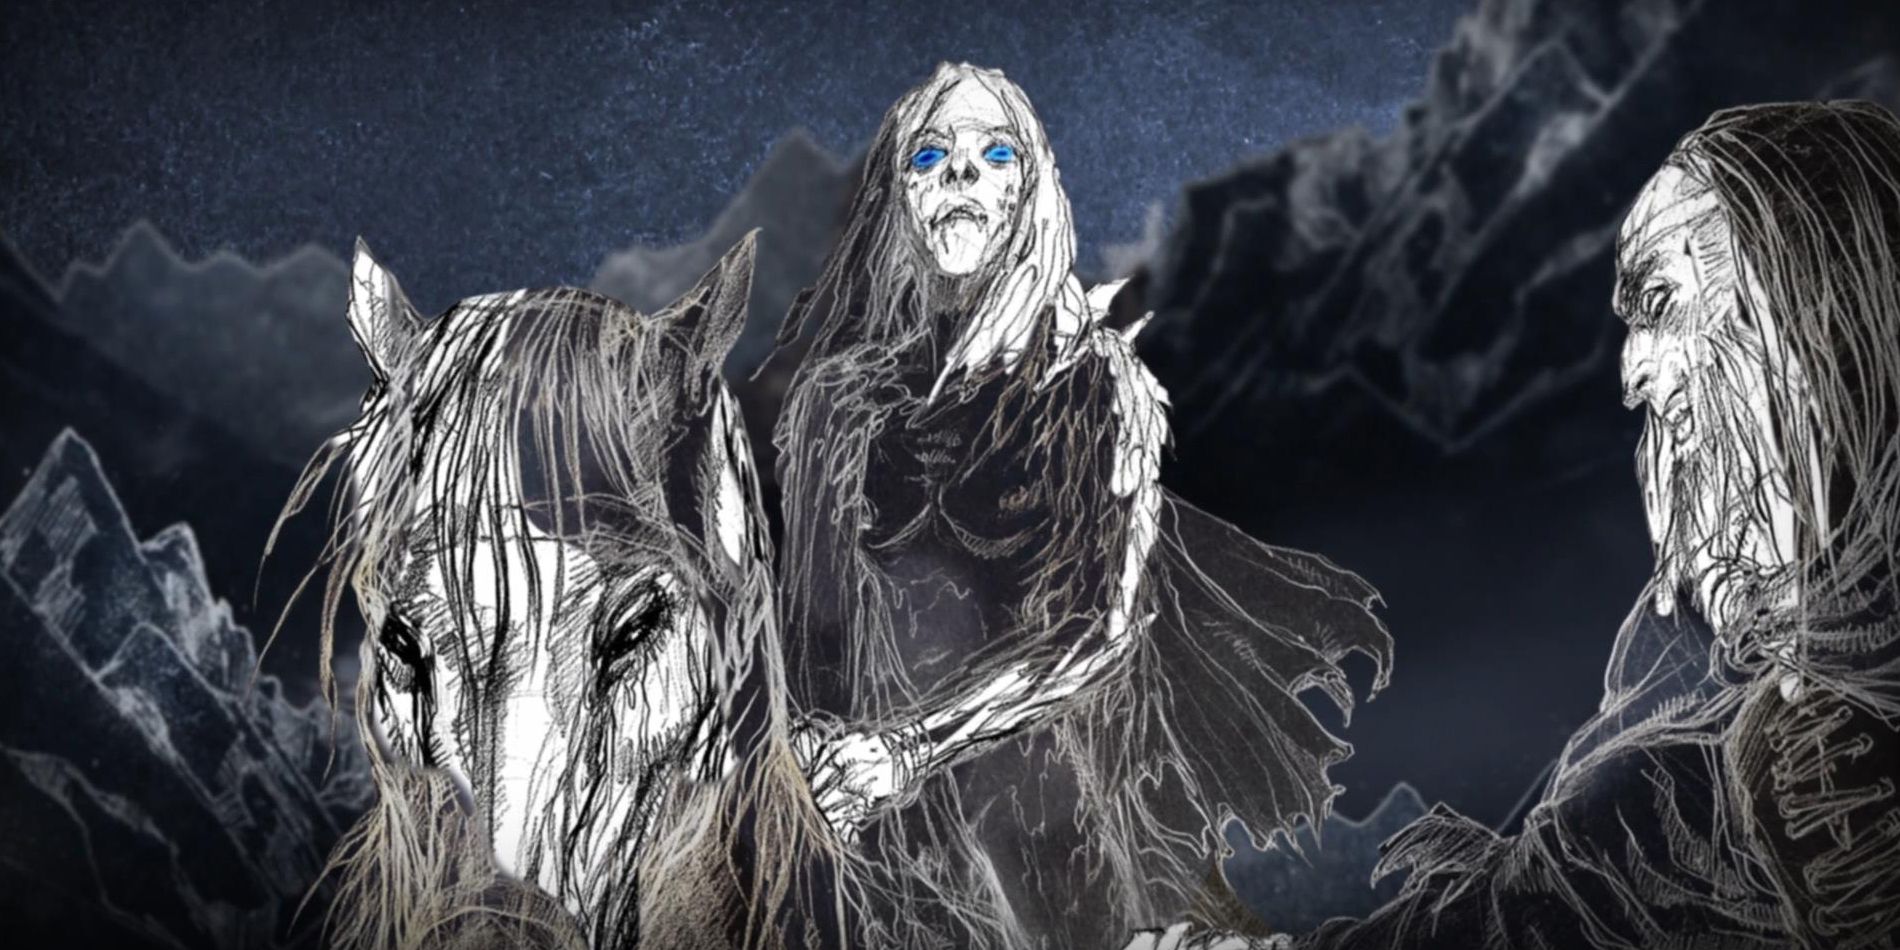 The Night's Queen image in Game of Thrones